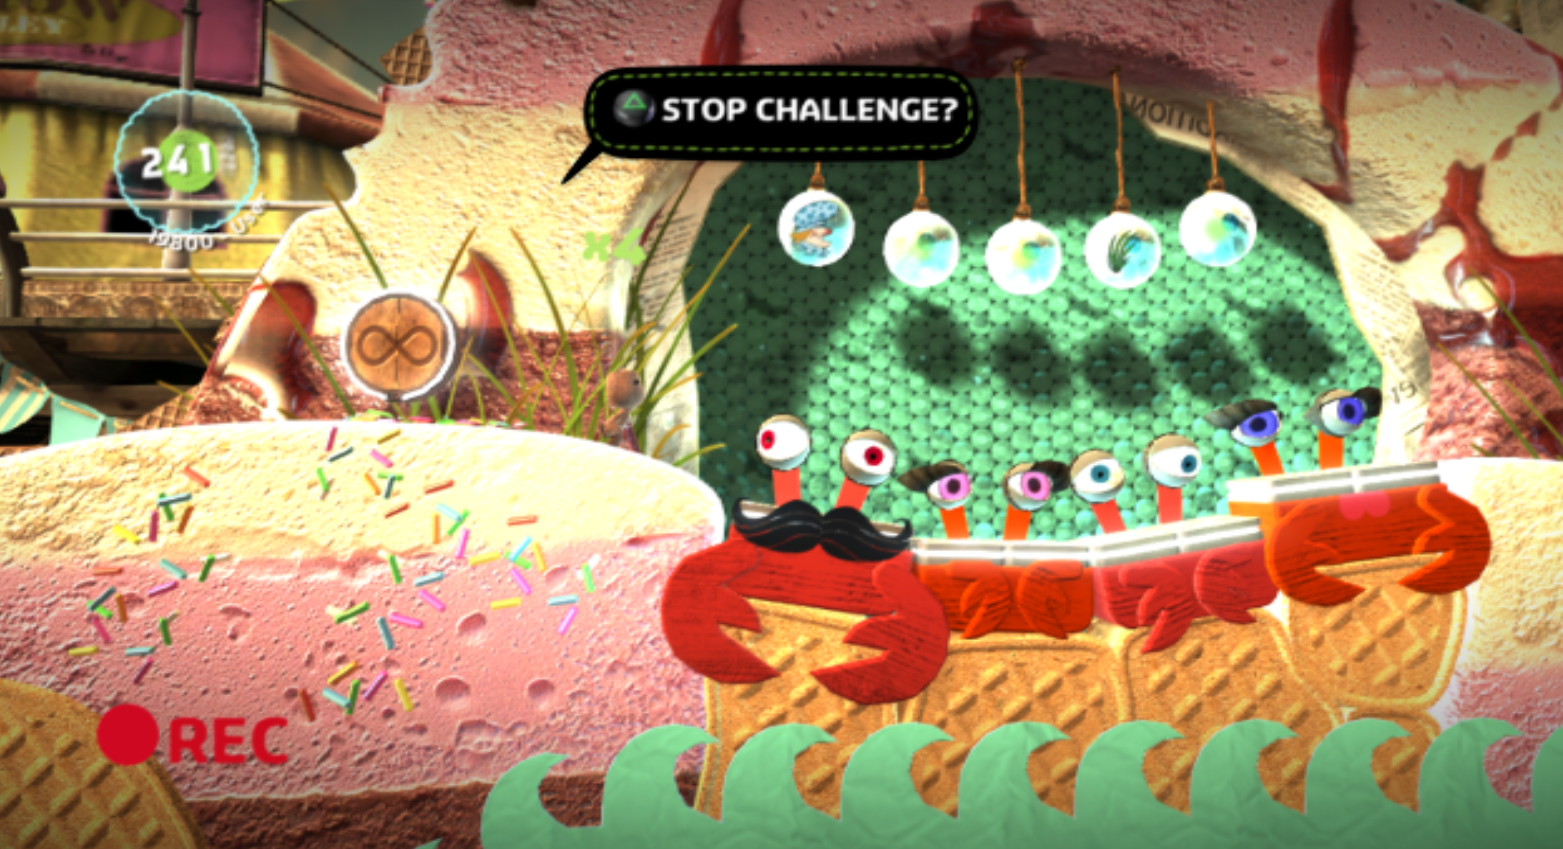 A scene from the lbp hub intro. a ui element says 'stop challenge?' with an option to press the triangle button. 